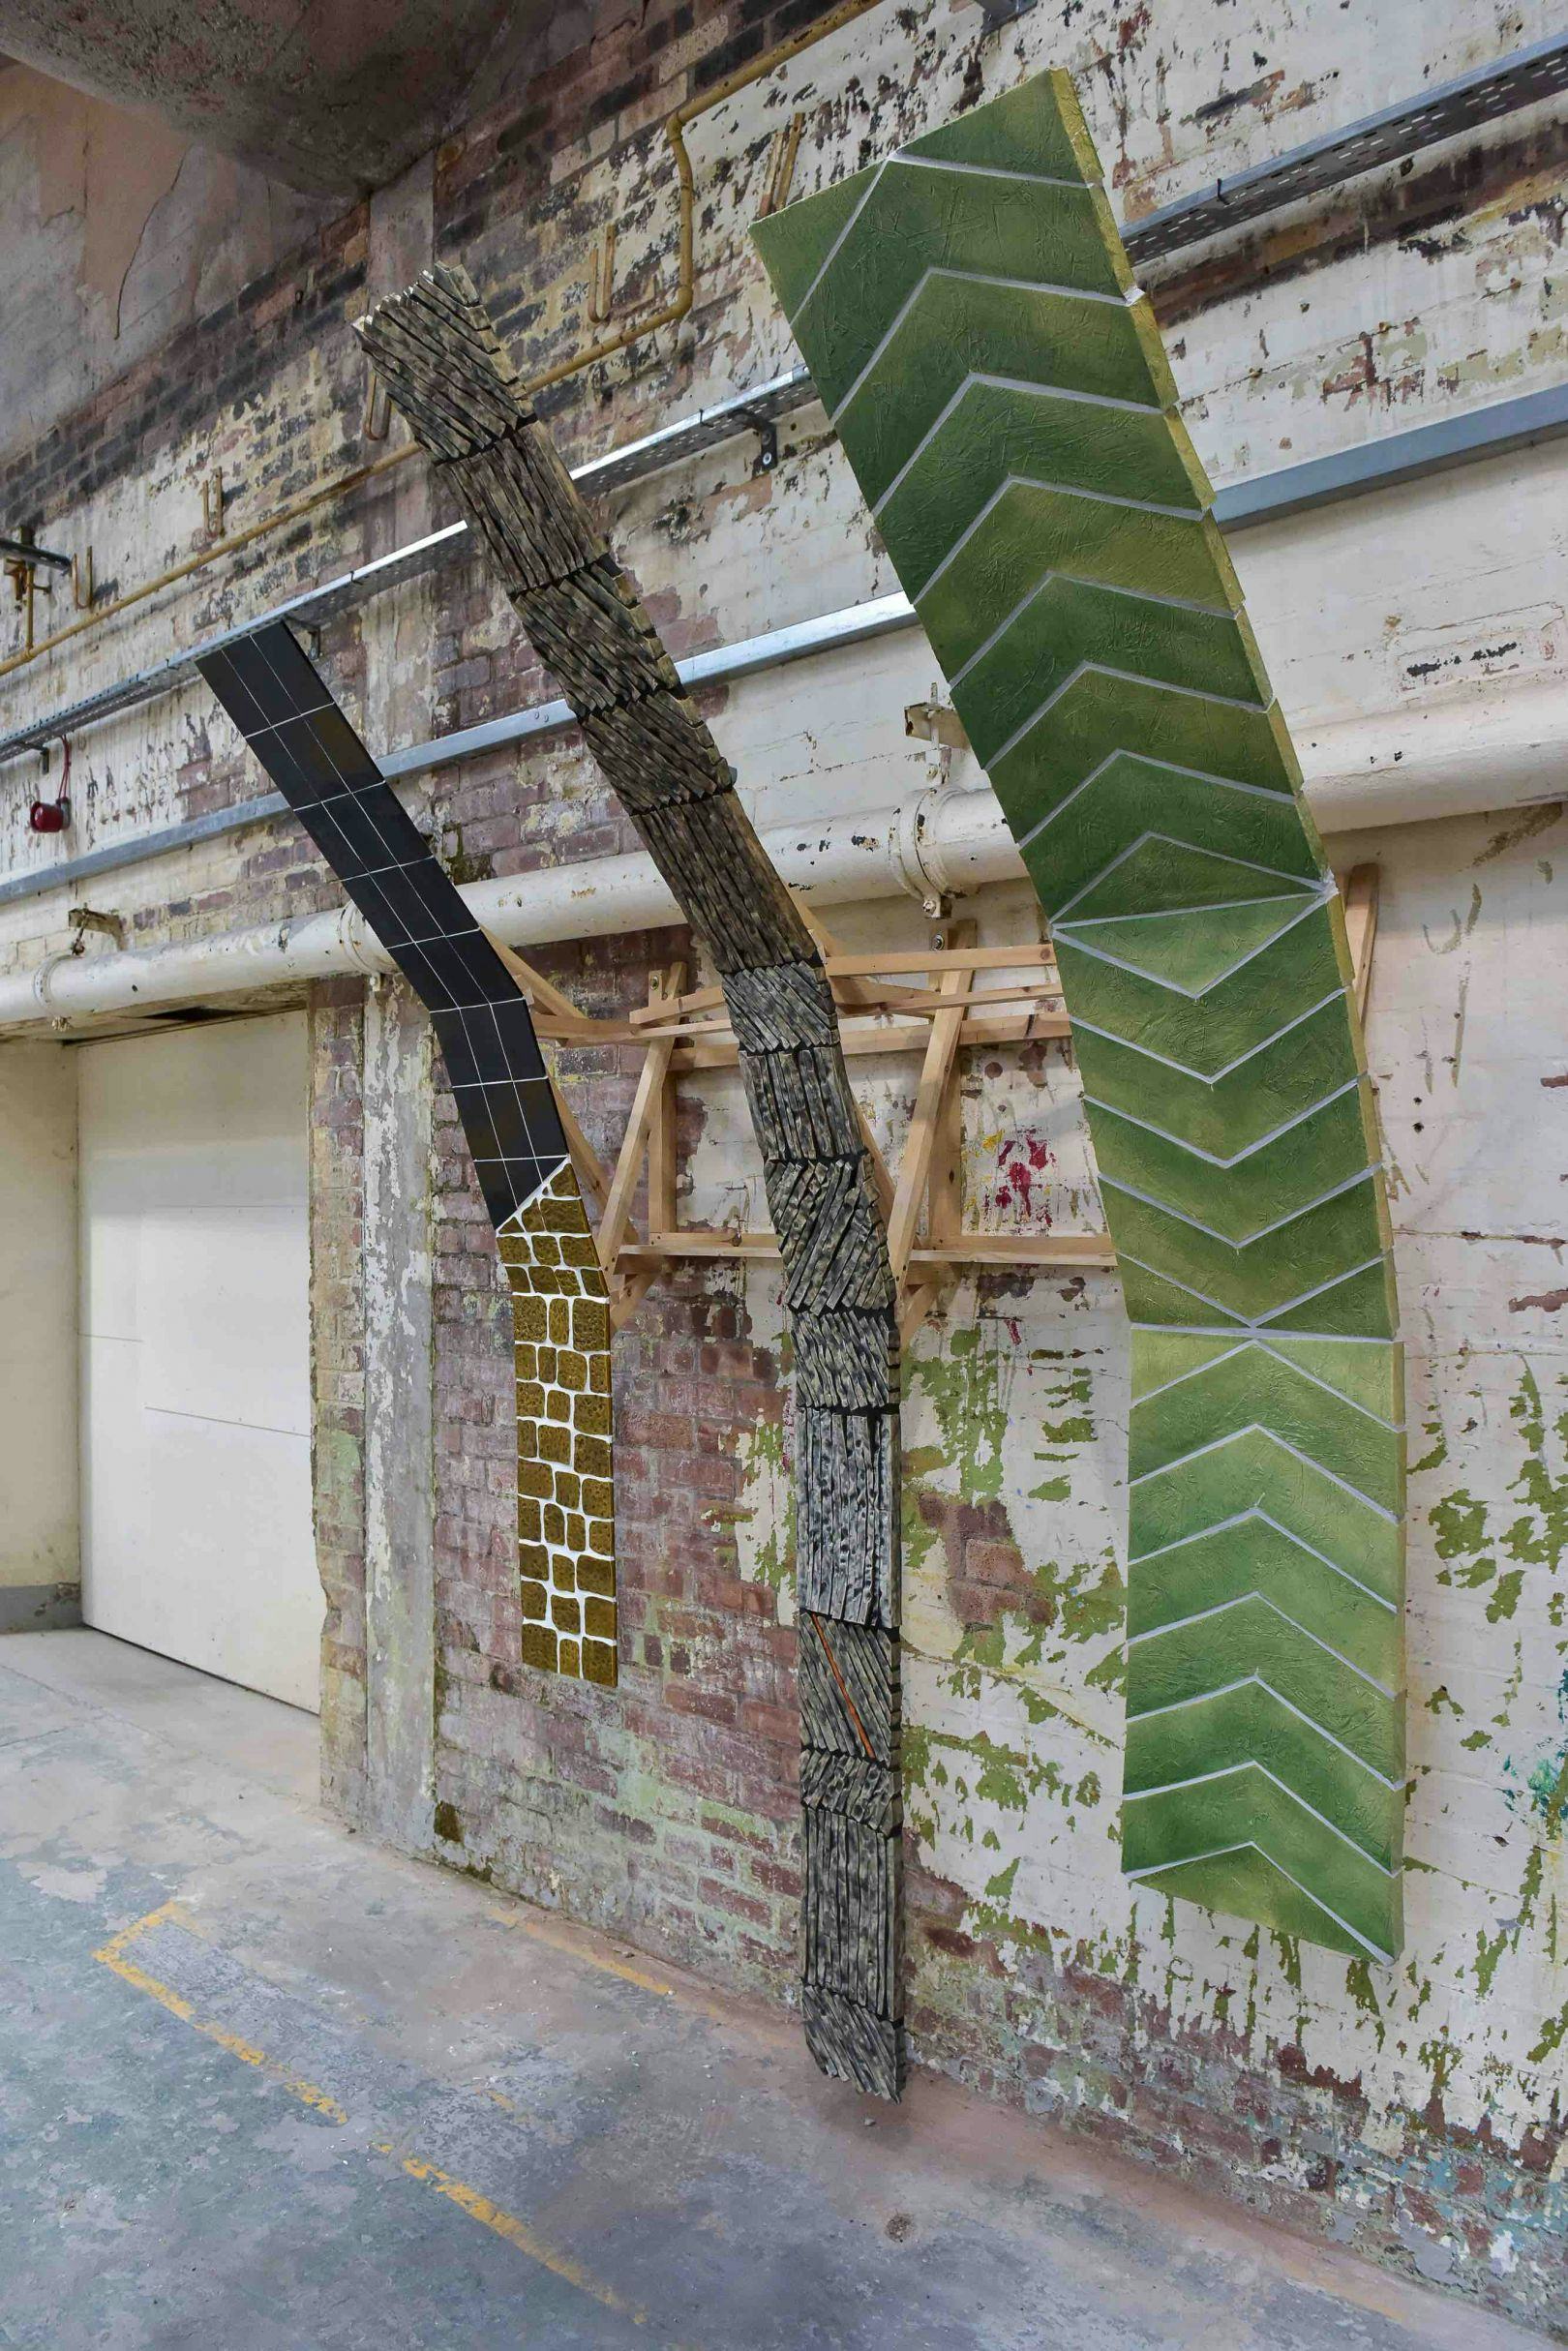 Three large, tiled artworks hang in an old building and curve up and over away from the wall